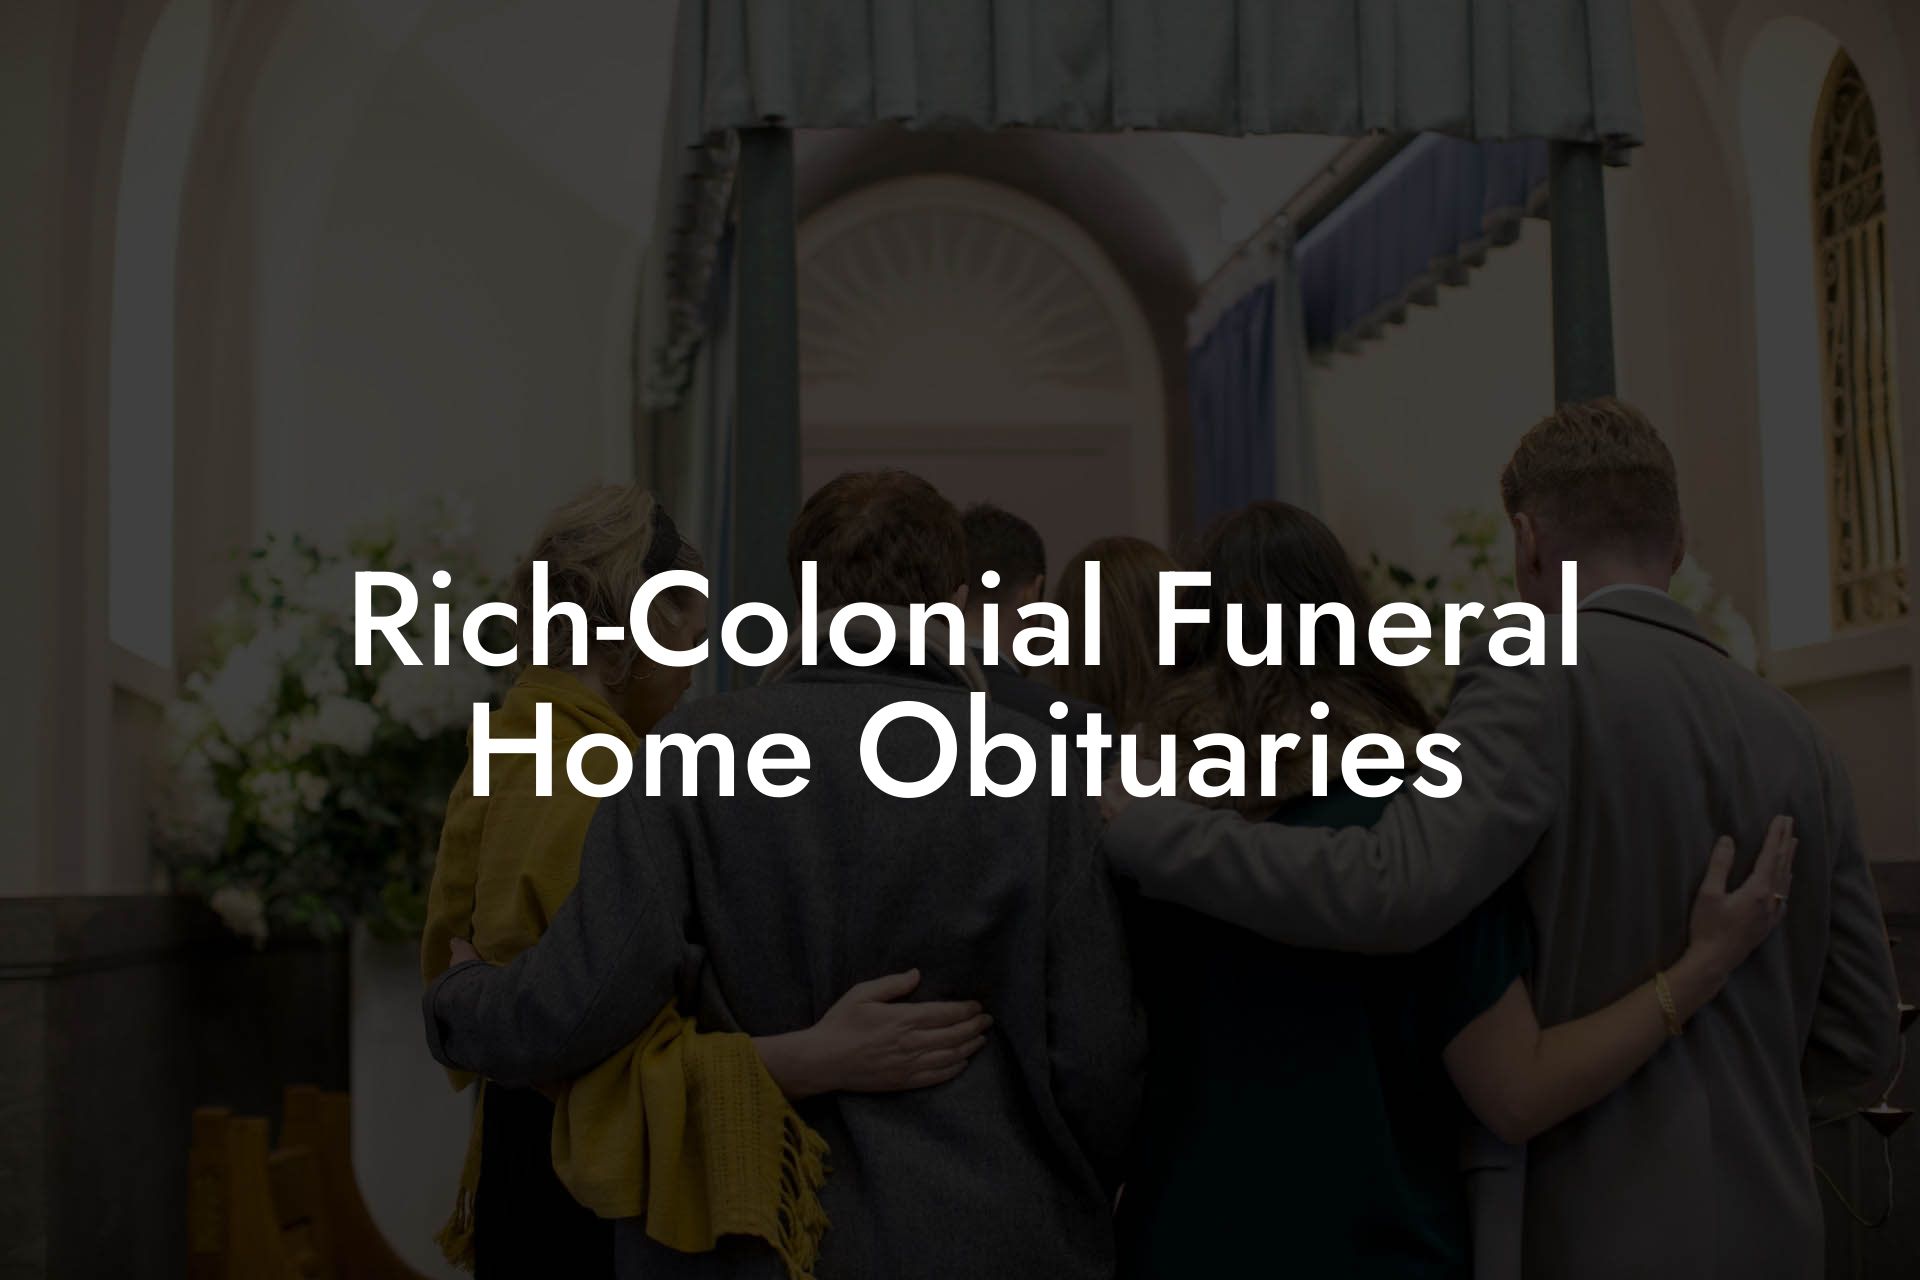 Rich-Colonial Funeral Home Obituaries